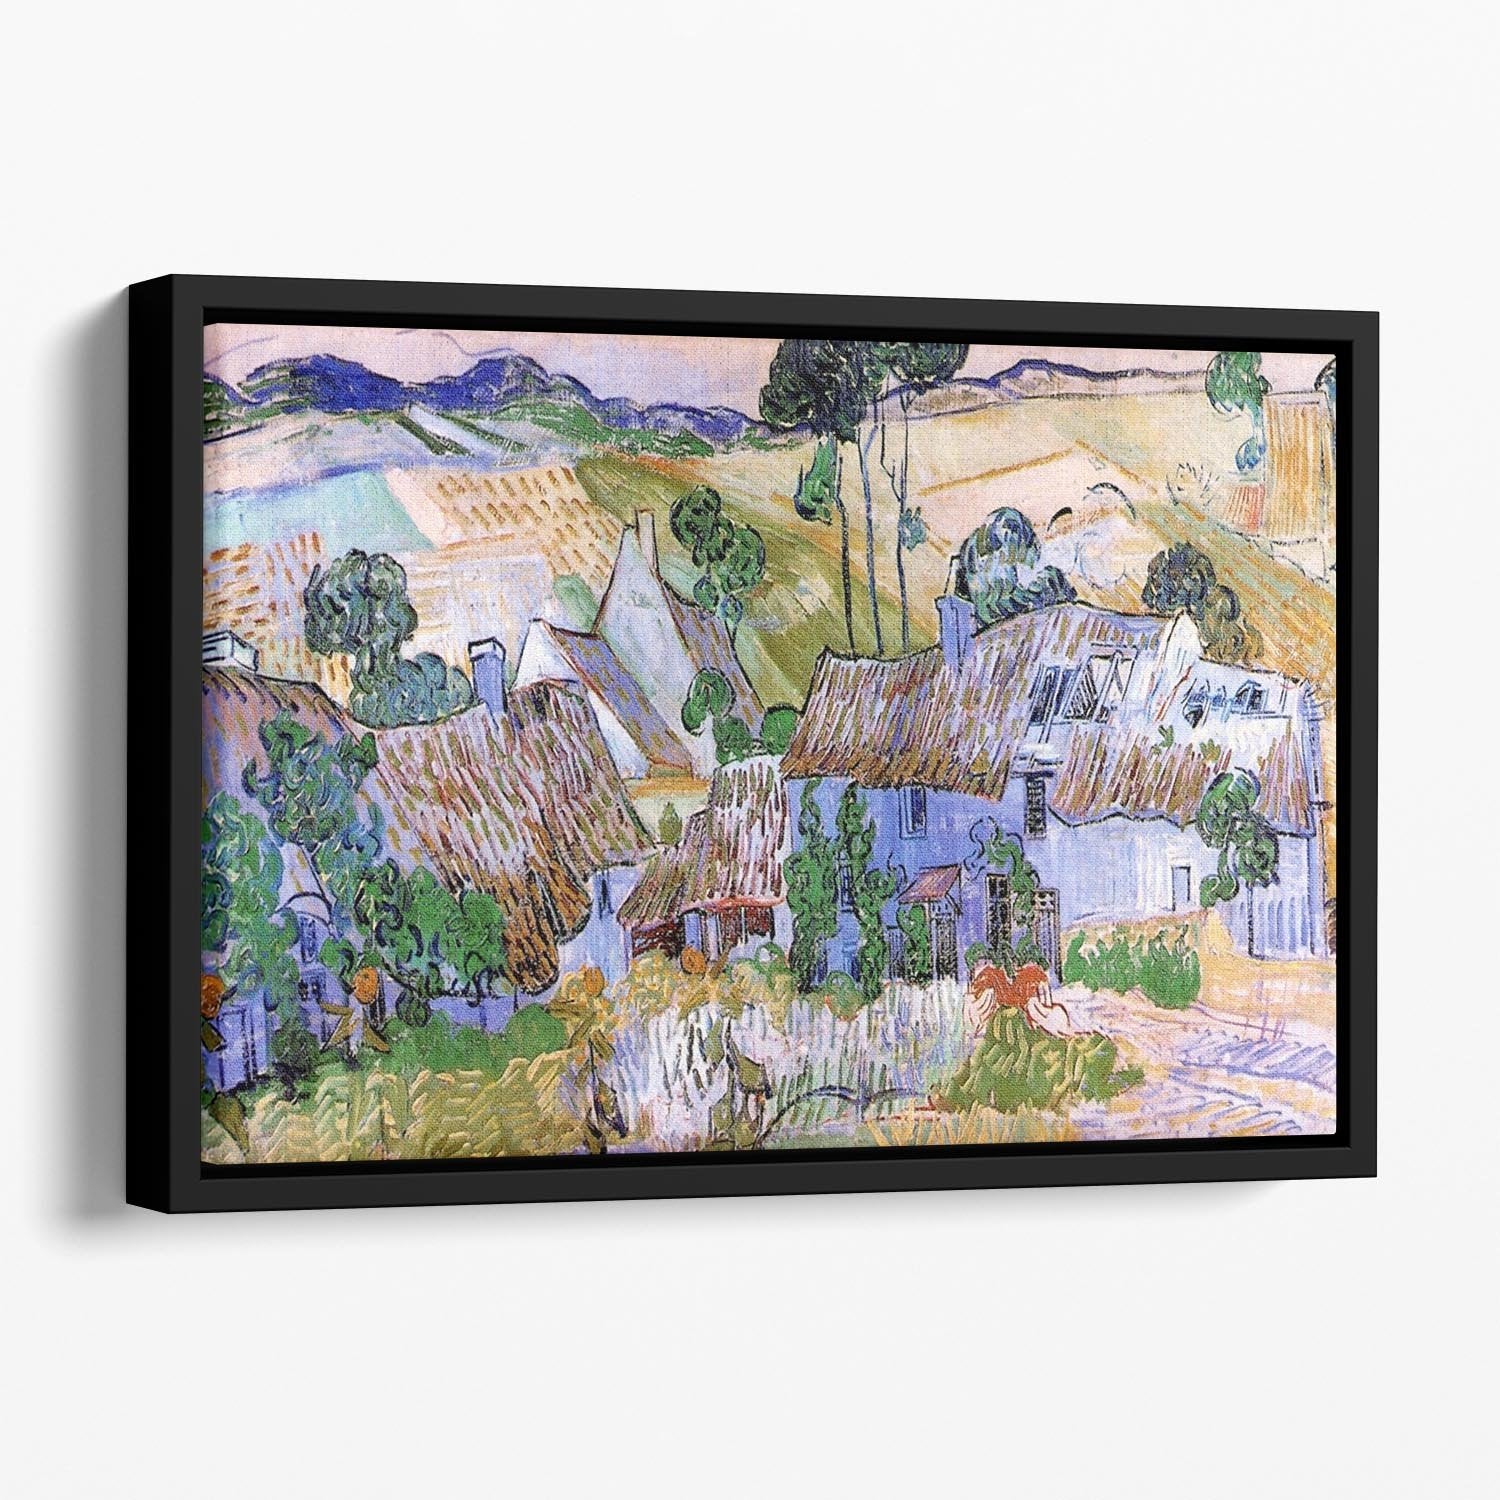 Thatched Cottages by a Hill by Van Gogh Floating Framed Canvas